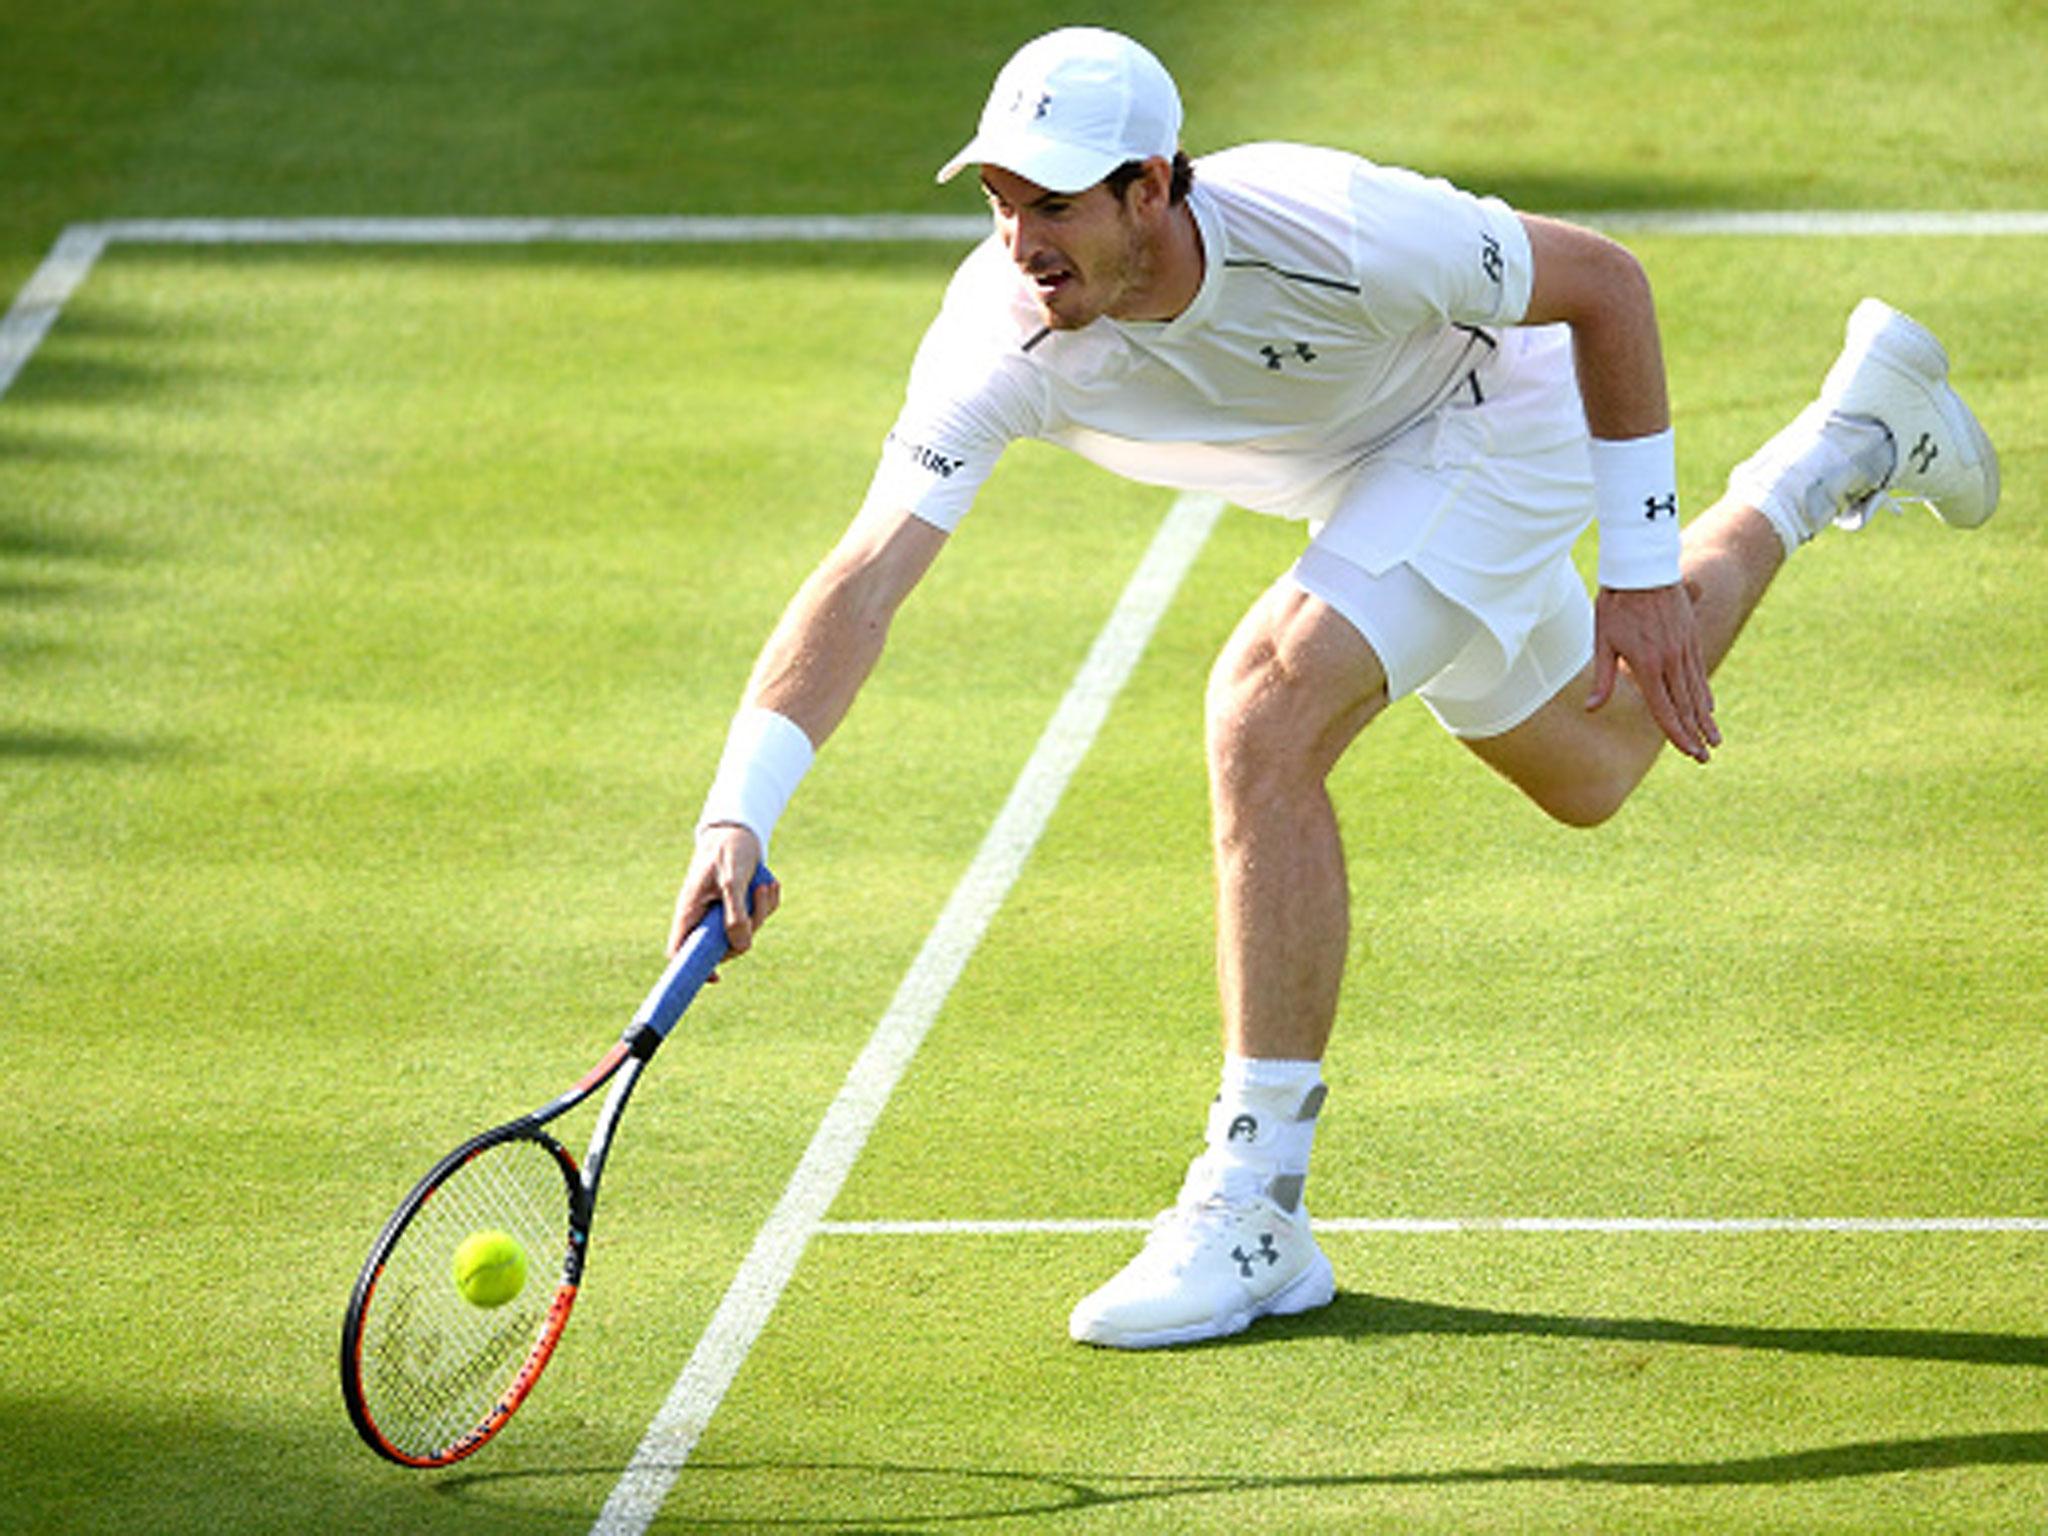 Andy Murray put in a strong display in beating Nicolas Mahut at Queen's on Tuesday evening (Getty)